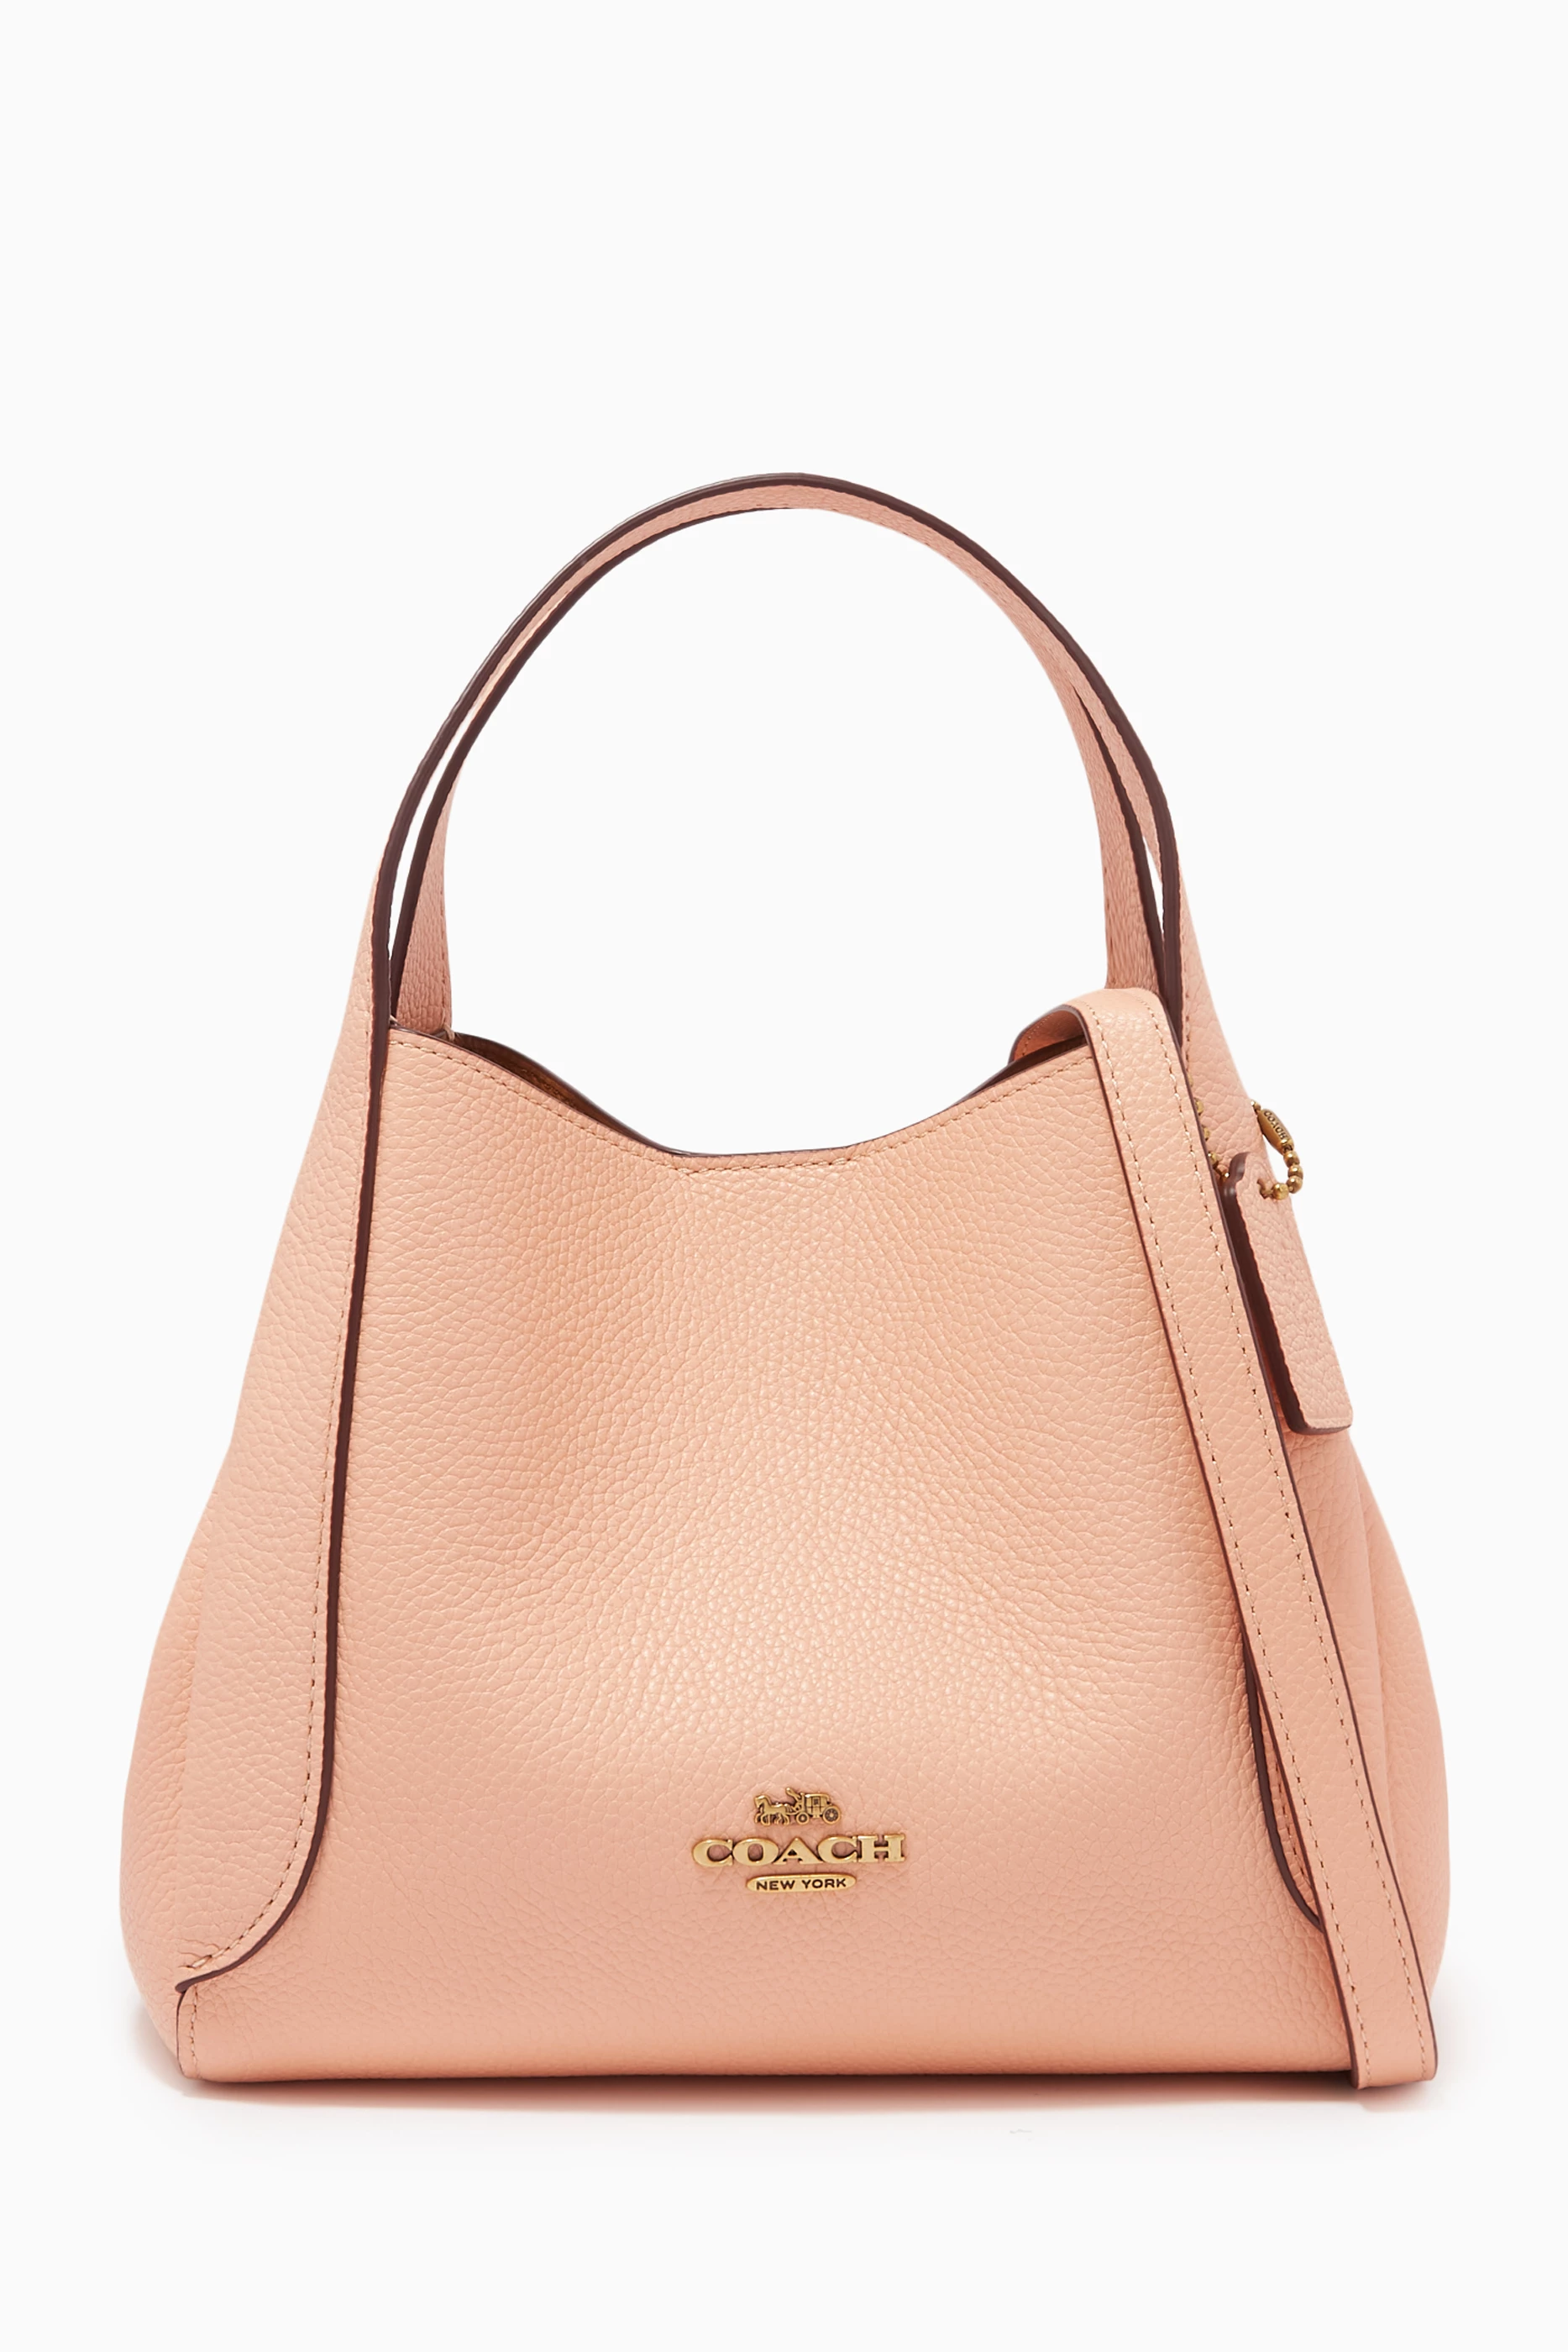 Buy Coach White Hadley Hobo 21 Bag in Pebble Leather for WOMEN in